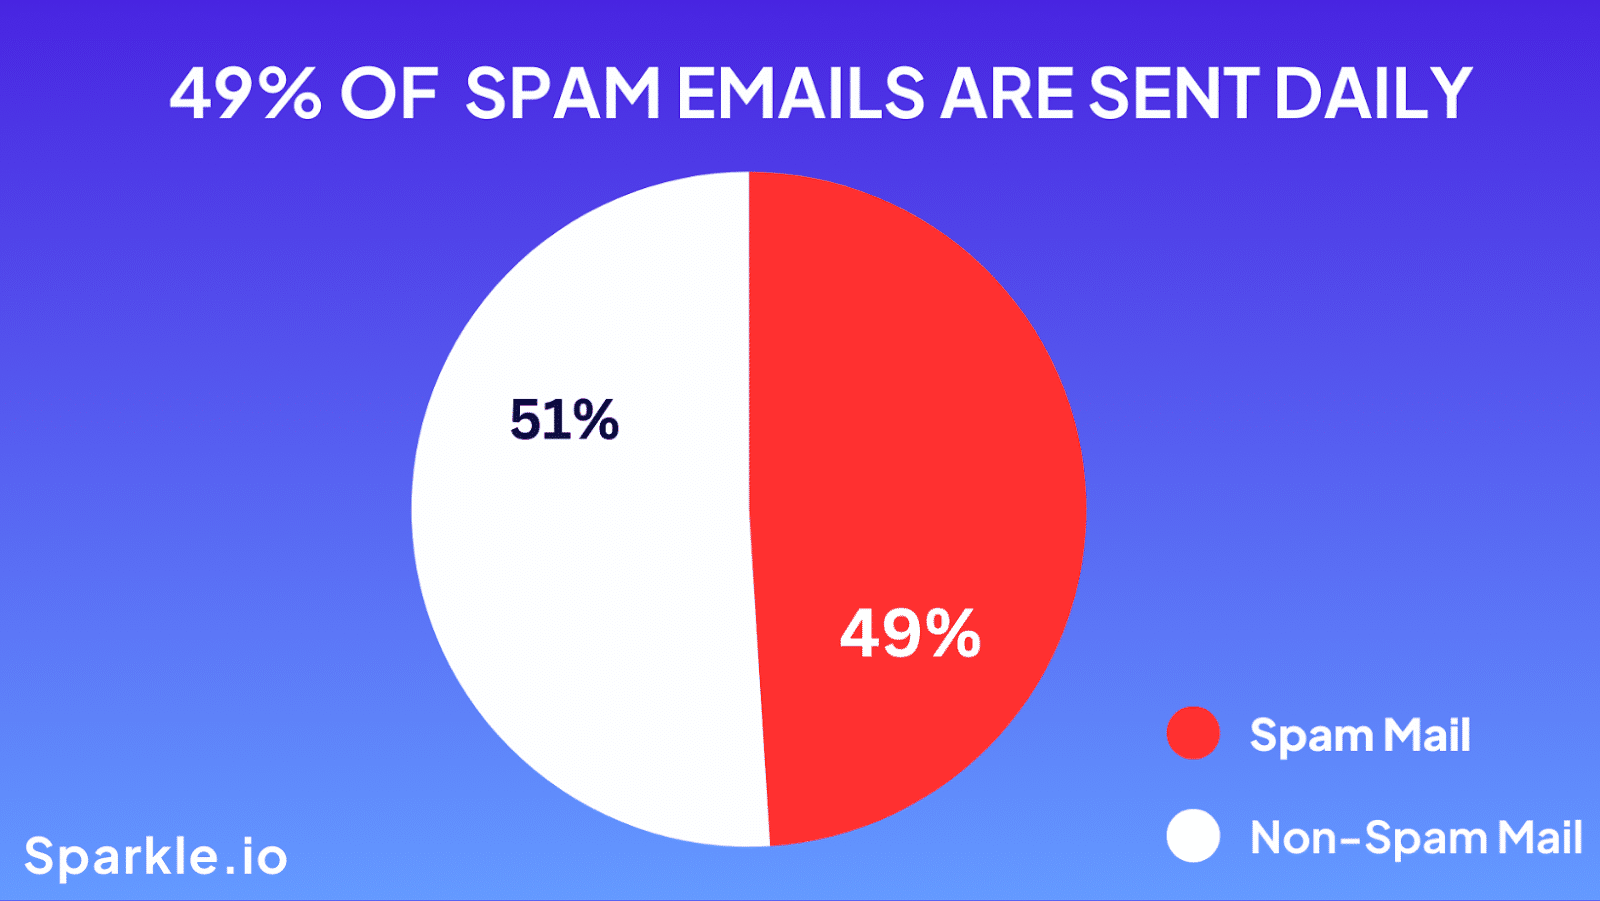 Piechart showing 49% of Spam Emails are Sent Daily